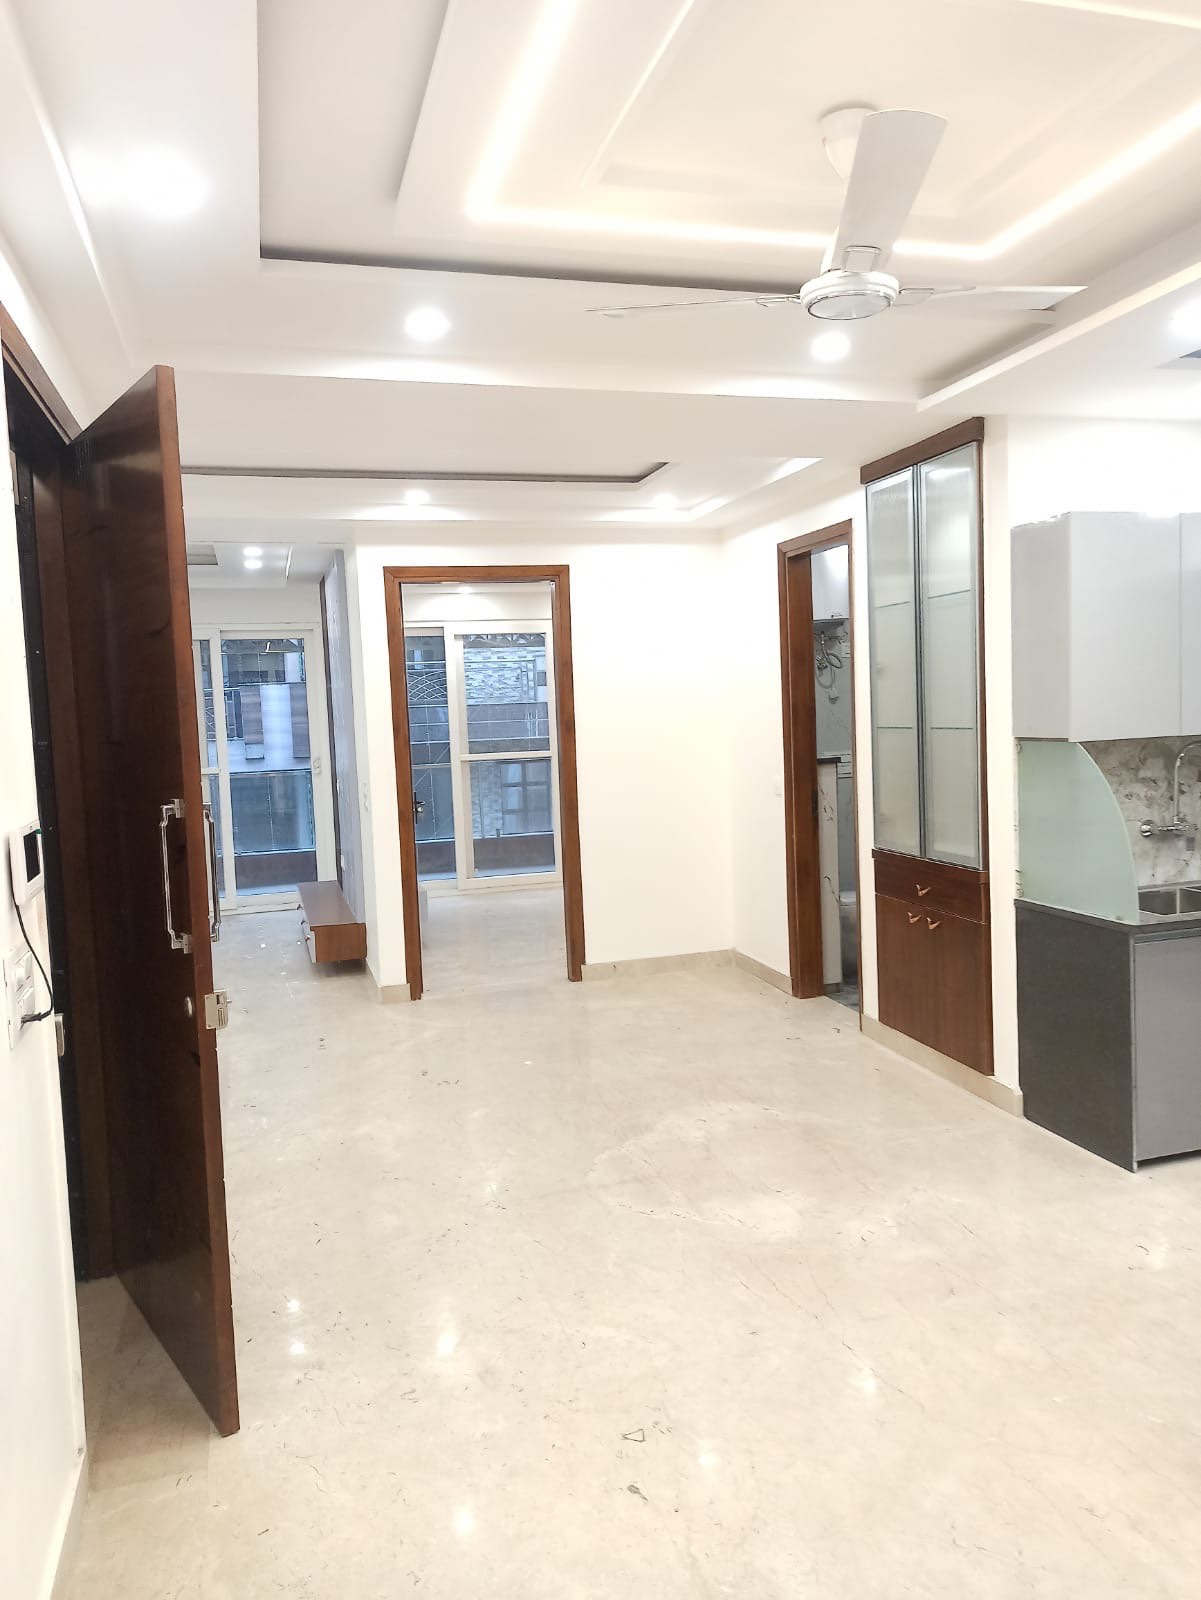 3 Bed/ 2 Bath Sell Apartment/ Flat; 900 sq. ft. carpet area; New Construction for sale @VIRENDER NAGAR 